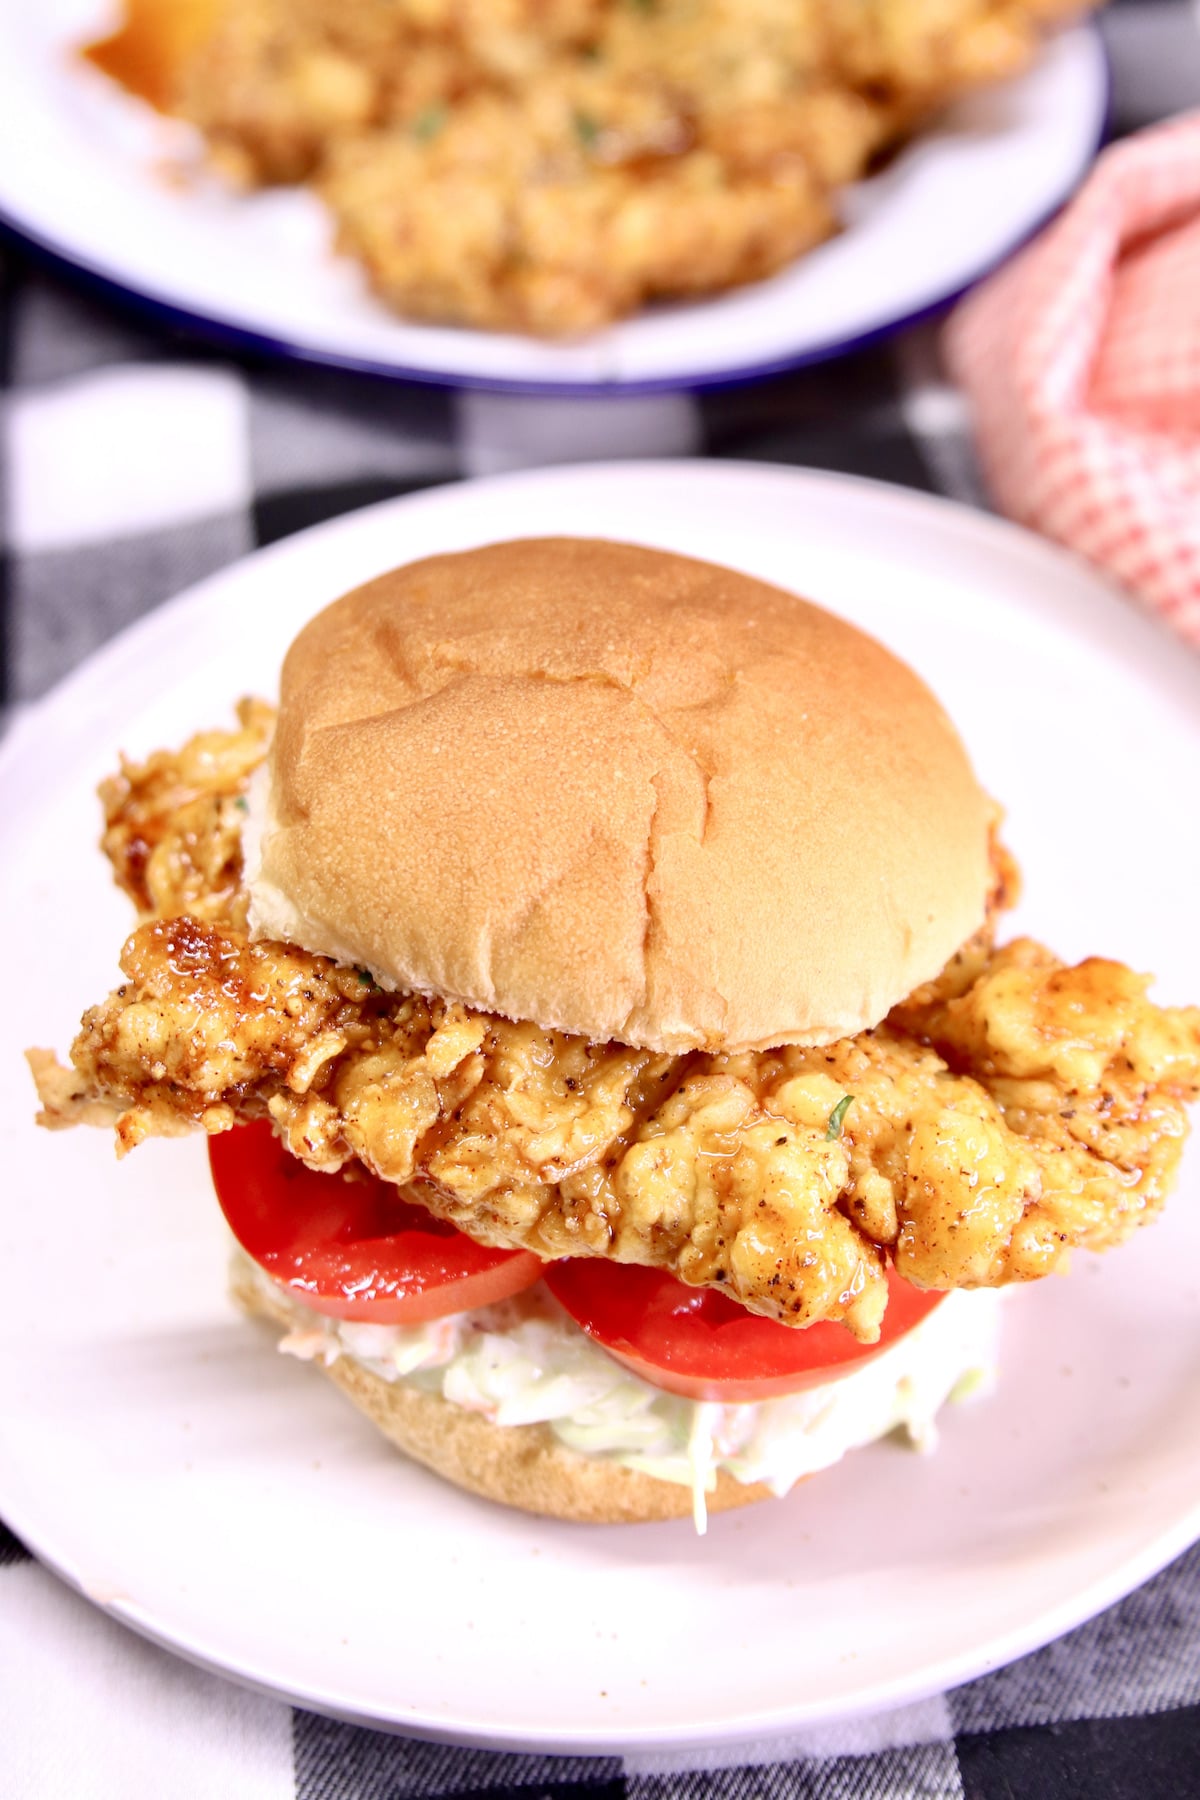 Crispy chicken tender sandwich with slaw and sliced tomatoes.